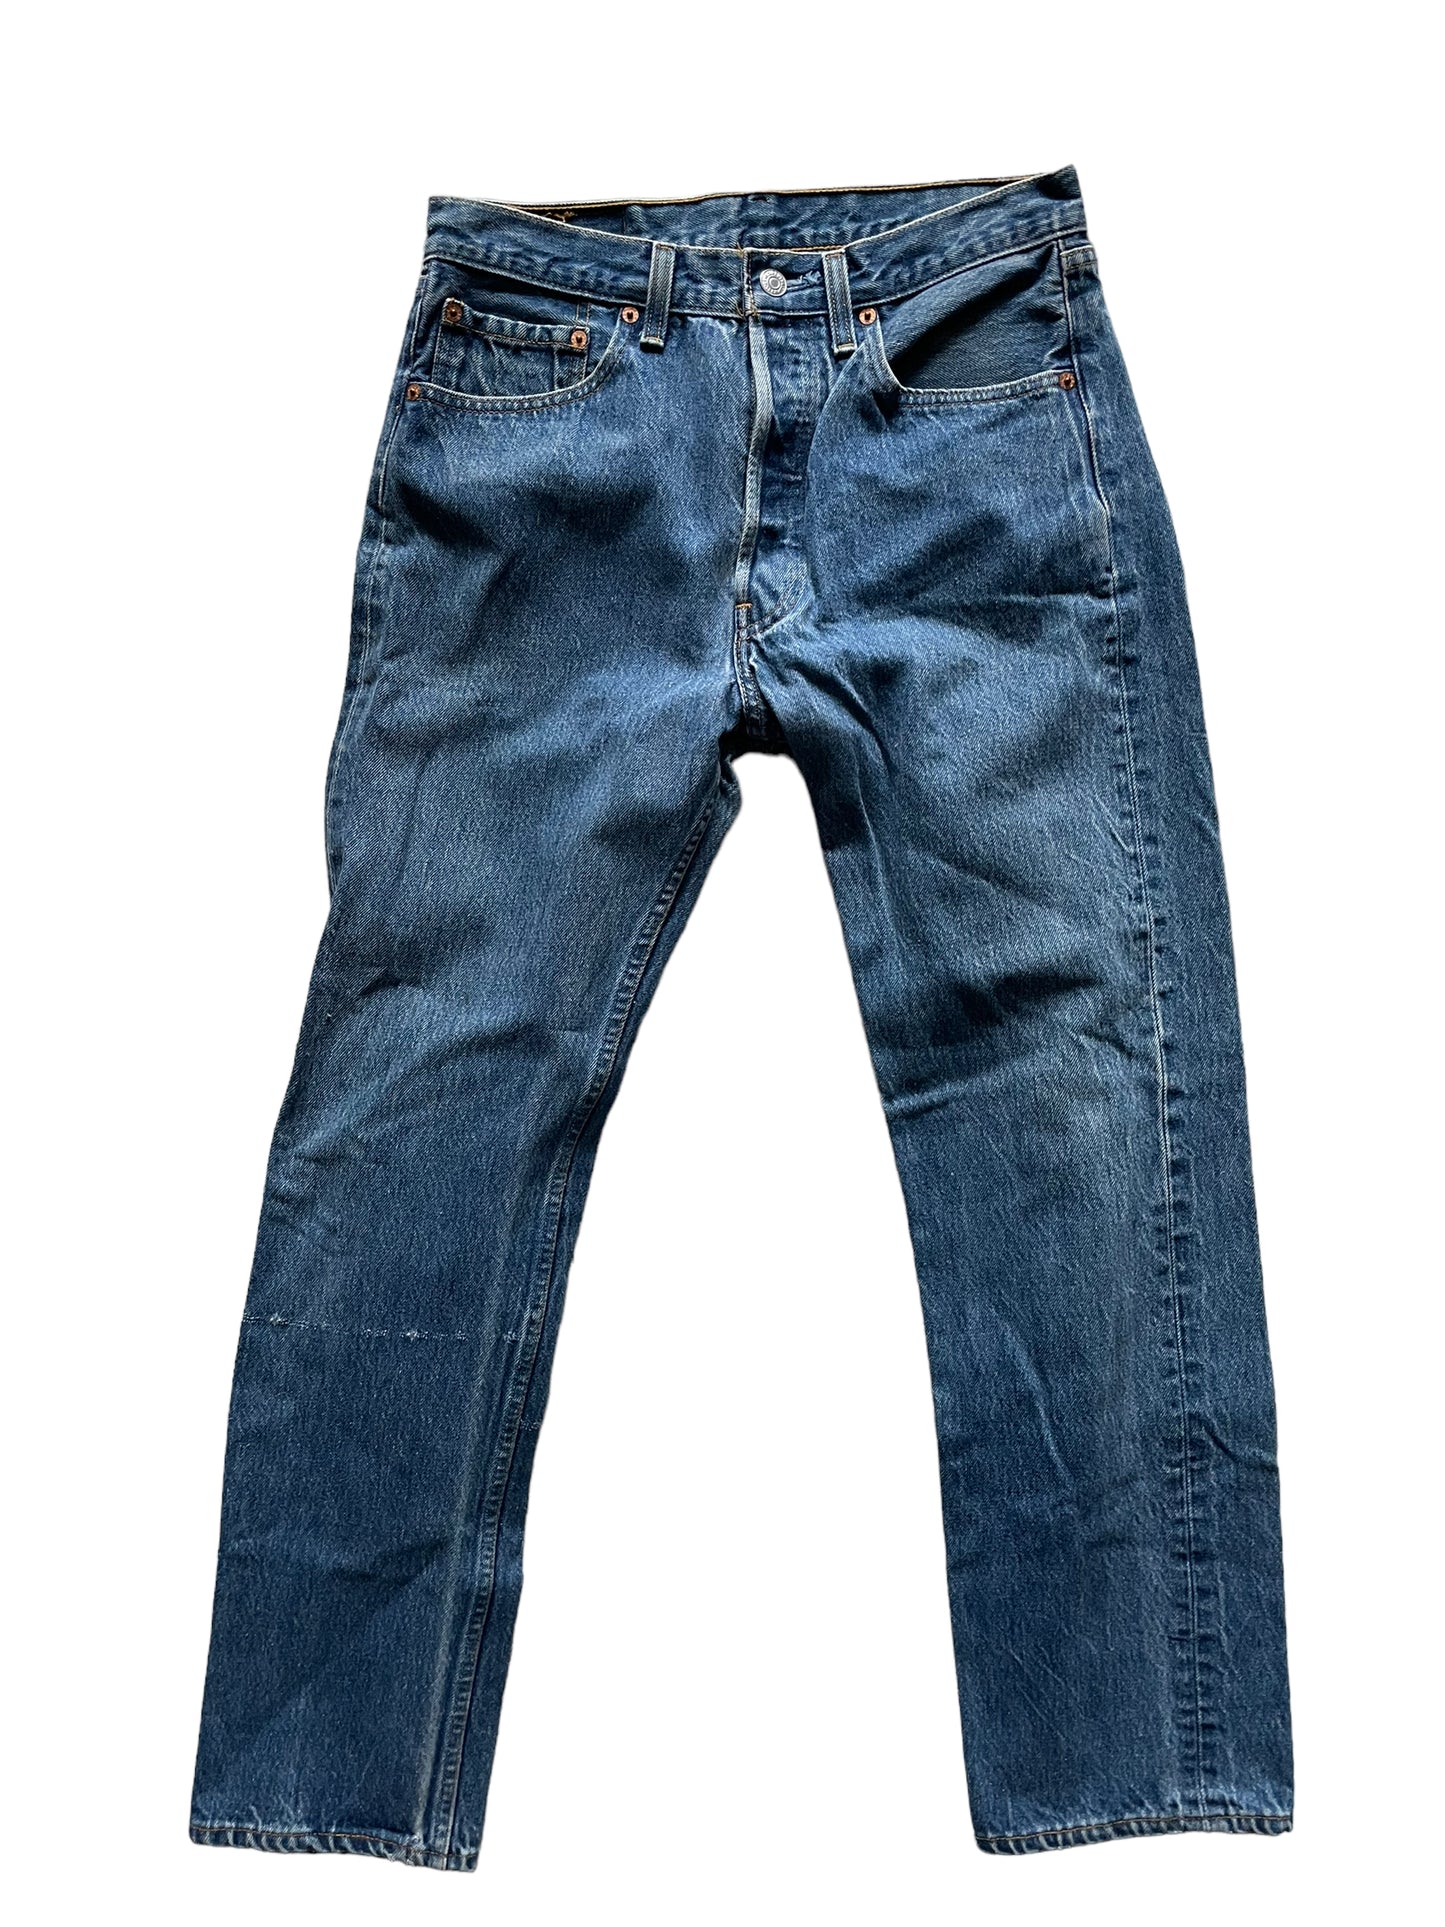 Full front view of Vintage 501xx Levi's 32x33